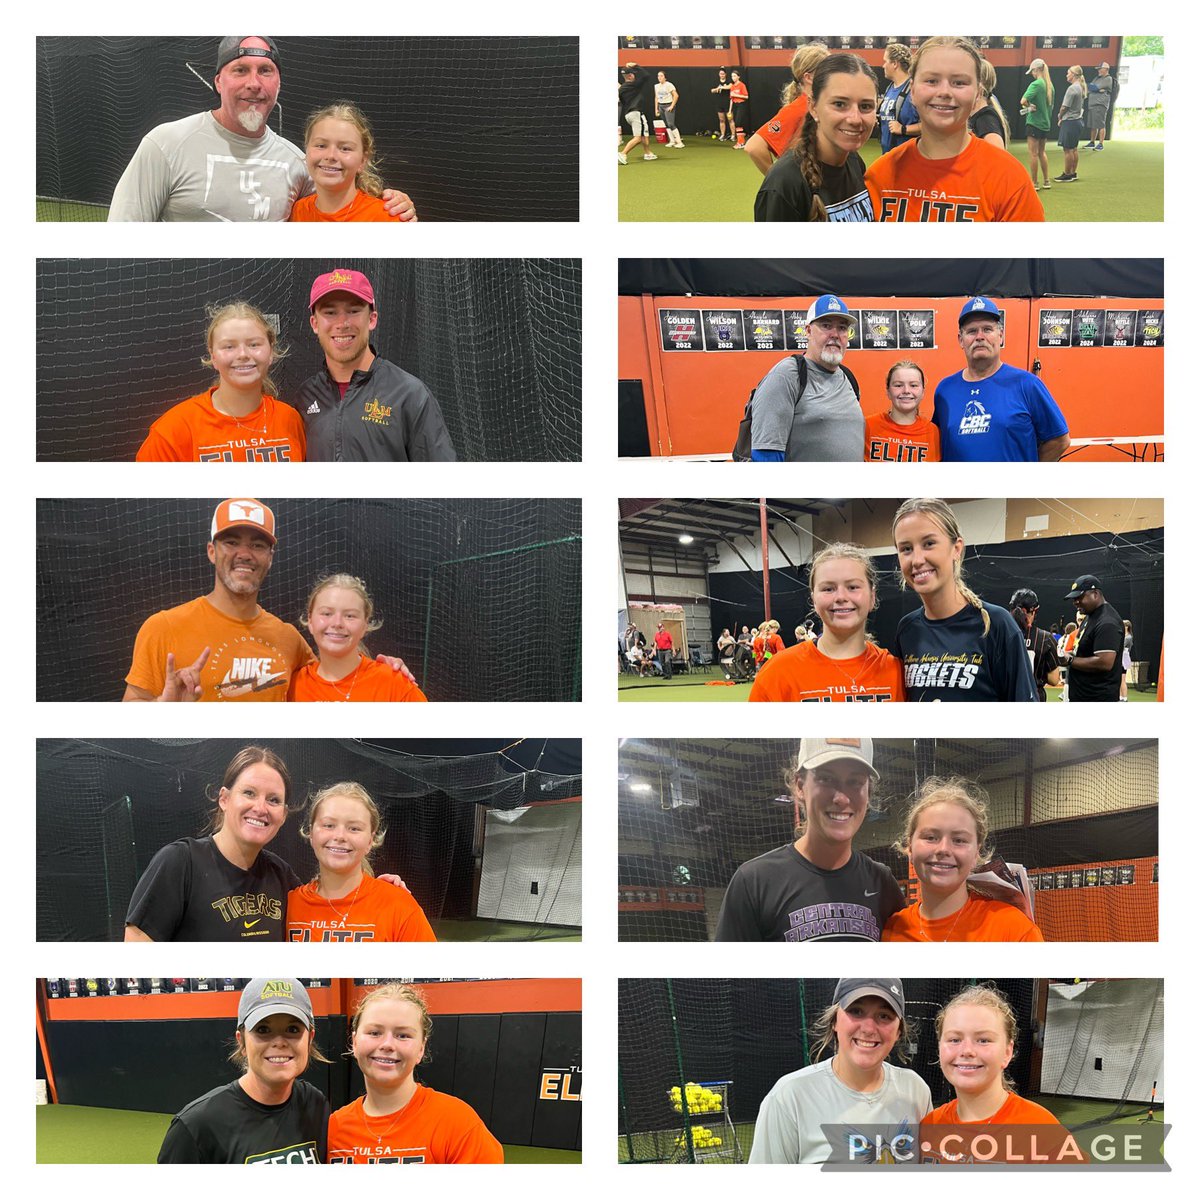 I’ve had two great camps this week at the Tulsa Elite D1 Hitting Camp and the Tulsa Elite Summer Collegiate Camp. I received encouragement and feedback from the coaches to help me improve my game further. Thanks Eric and Richard for all the work you put into me! #BeElite